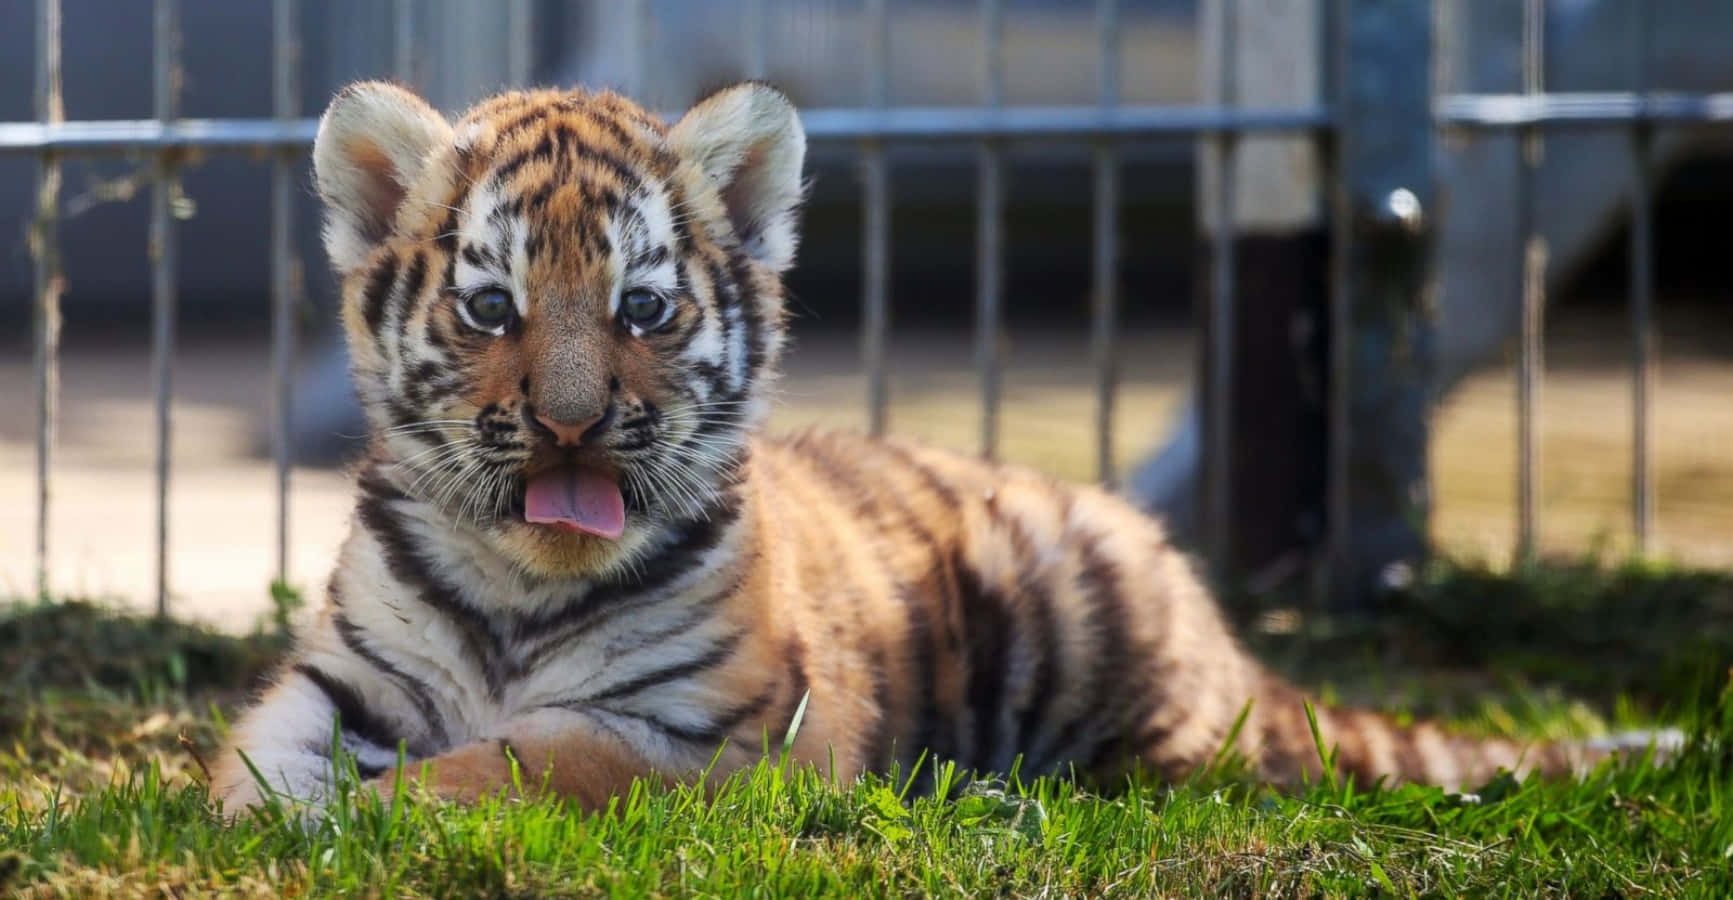 A Tiger Cub Is Laying In The Grass